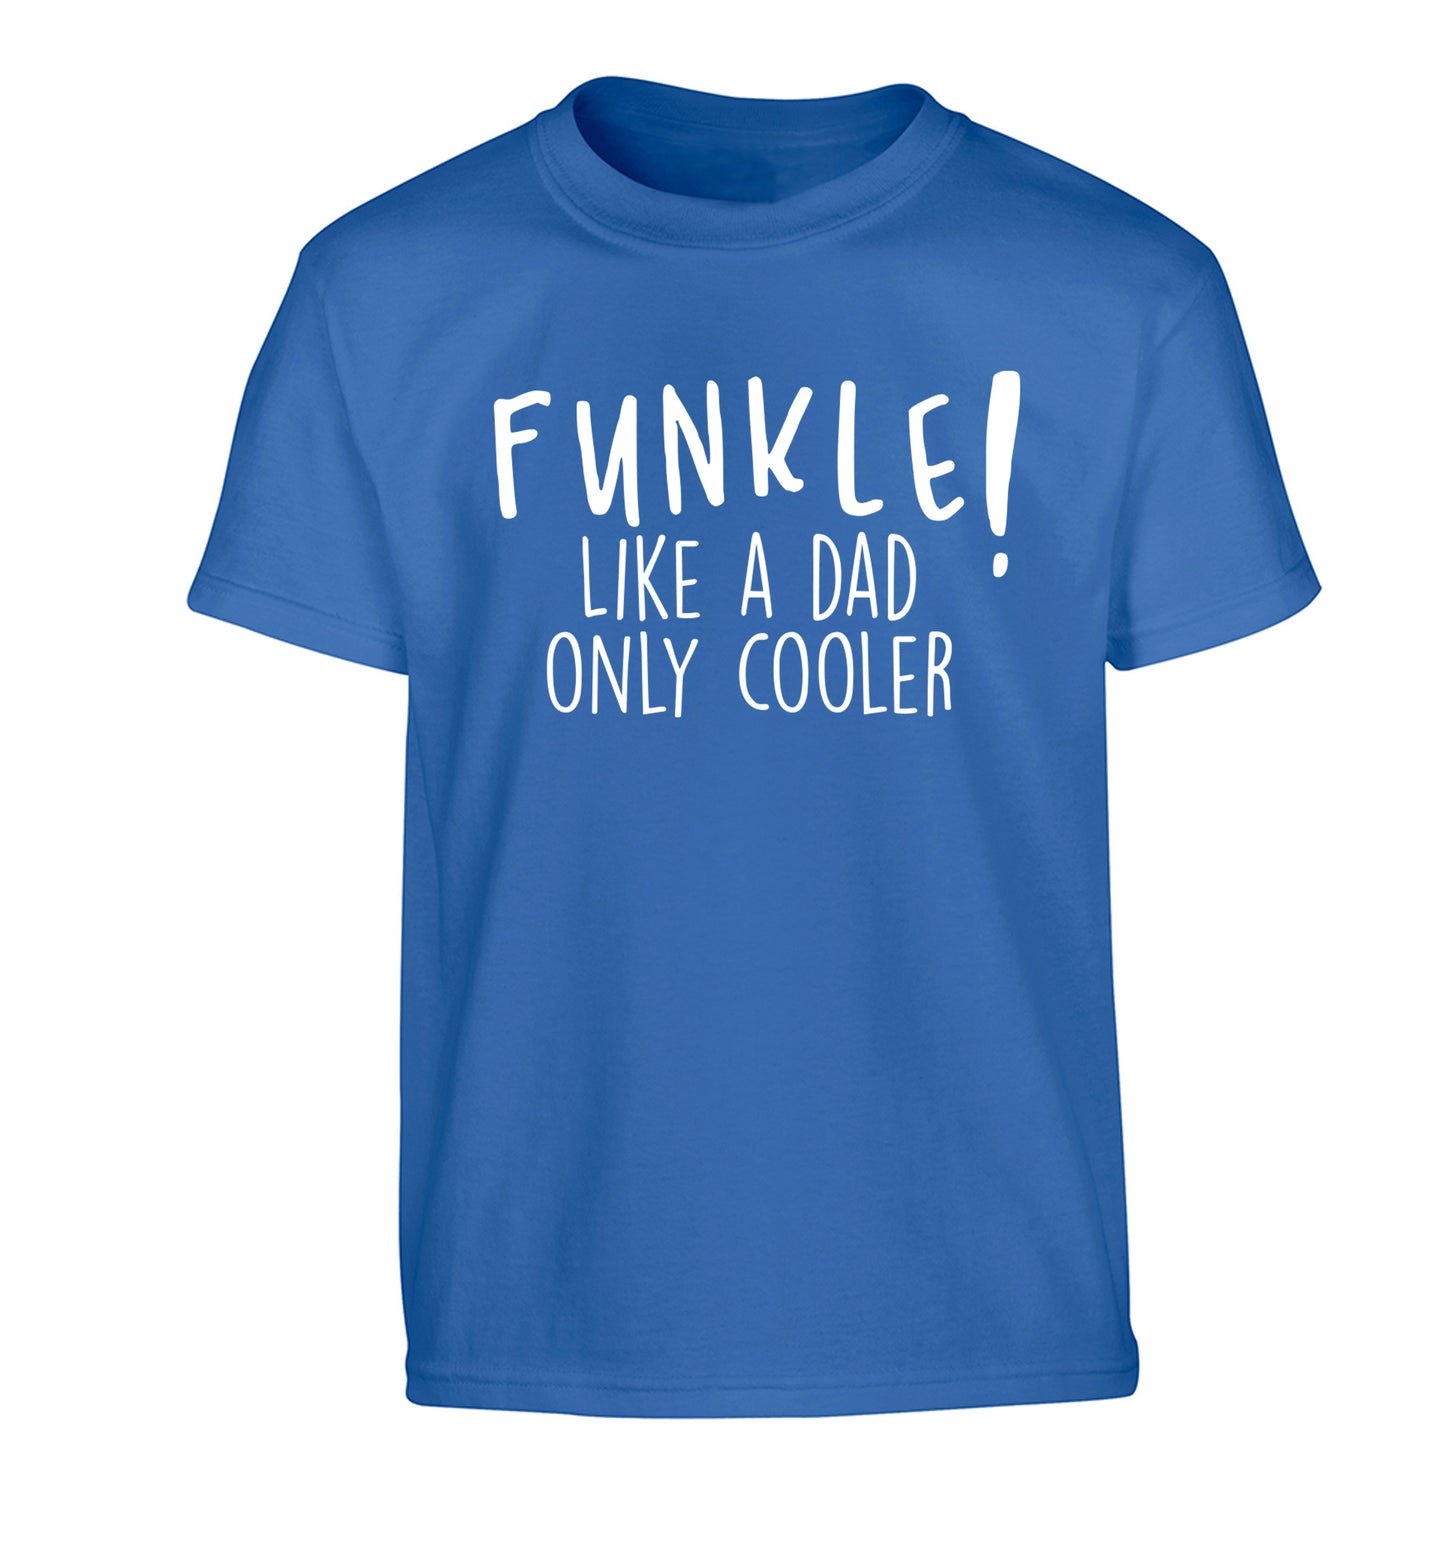 Funkle Like a Dad Only Cooler Children's blue Tshirt 12-13 Years